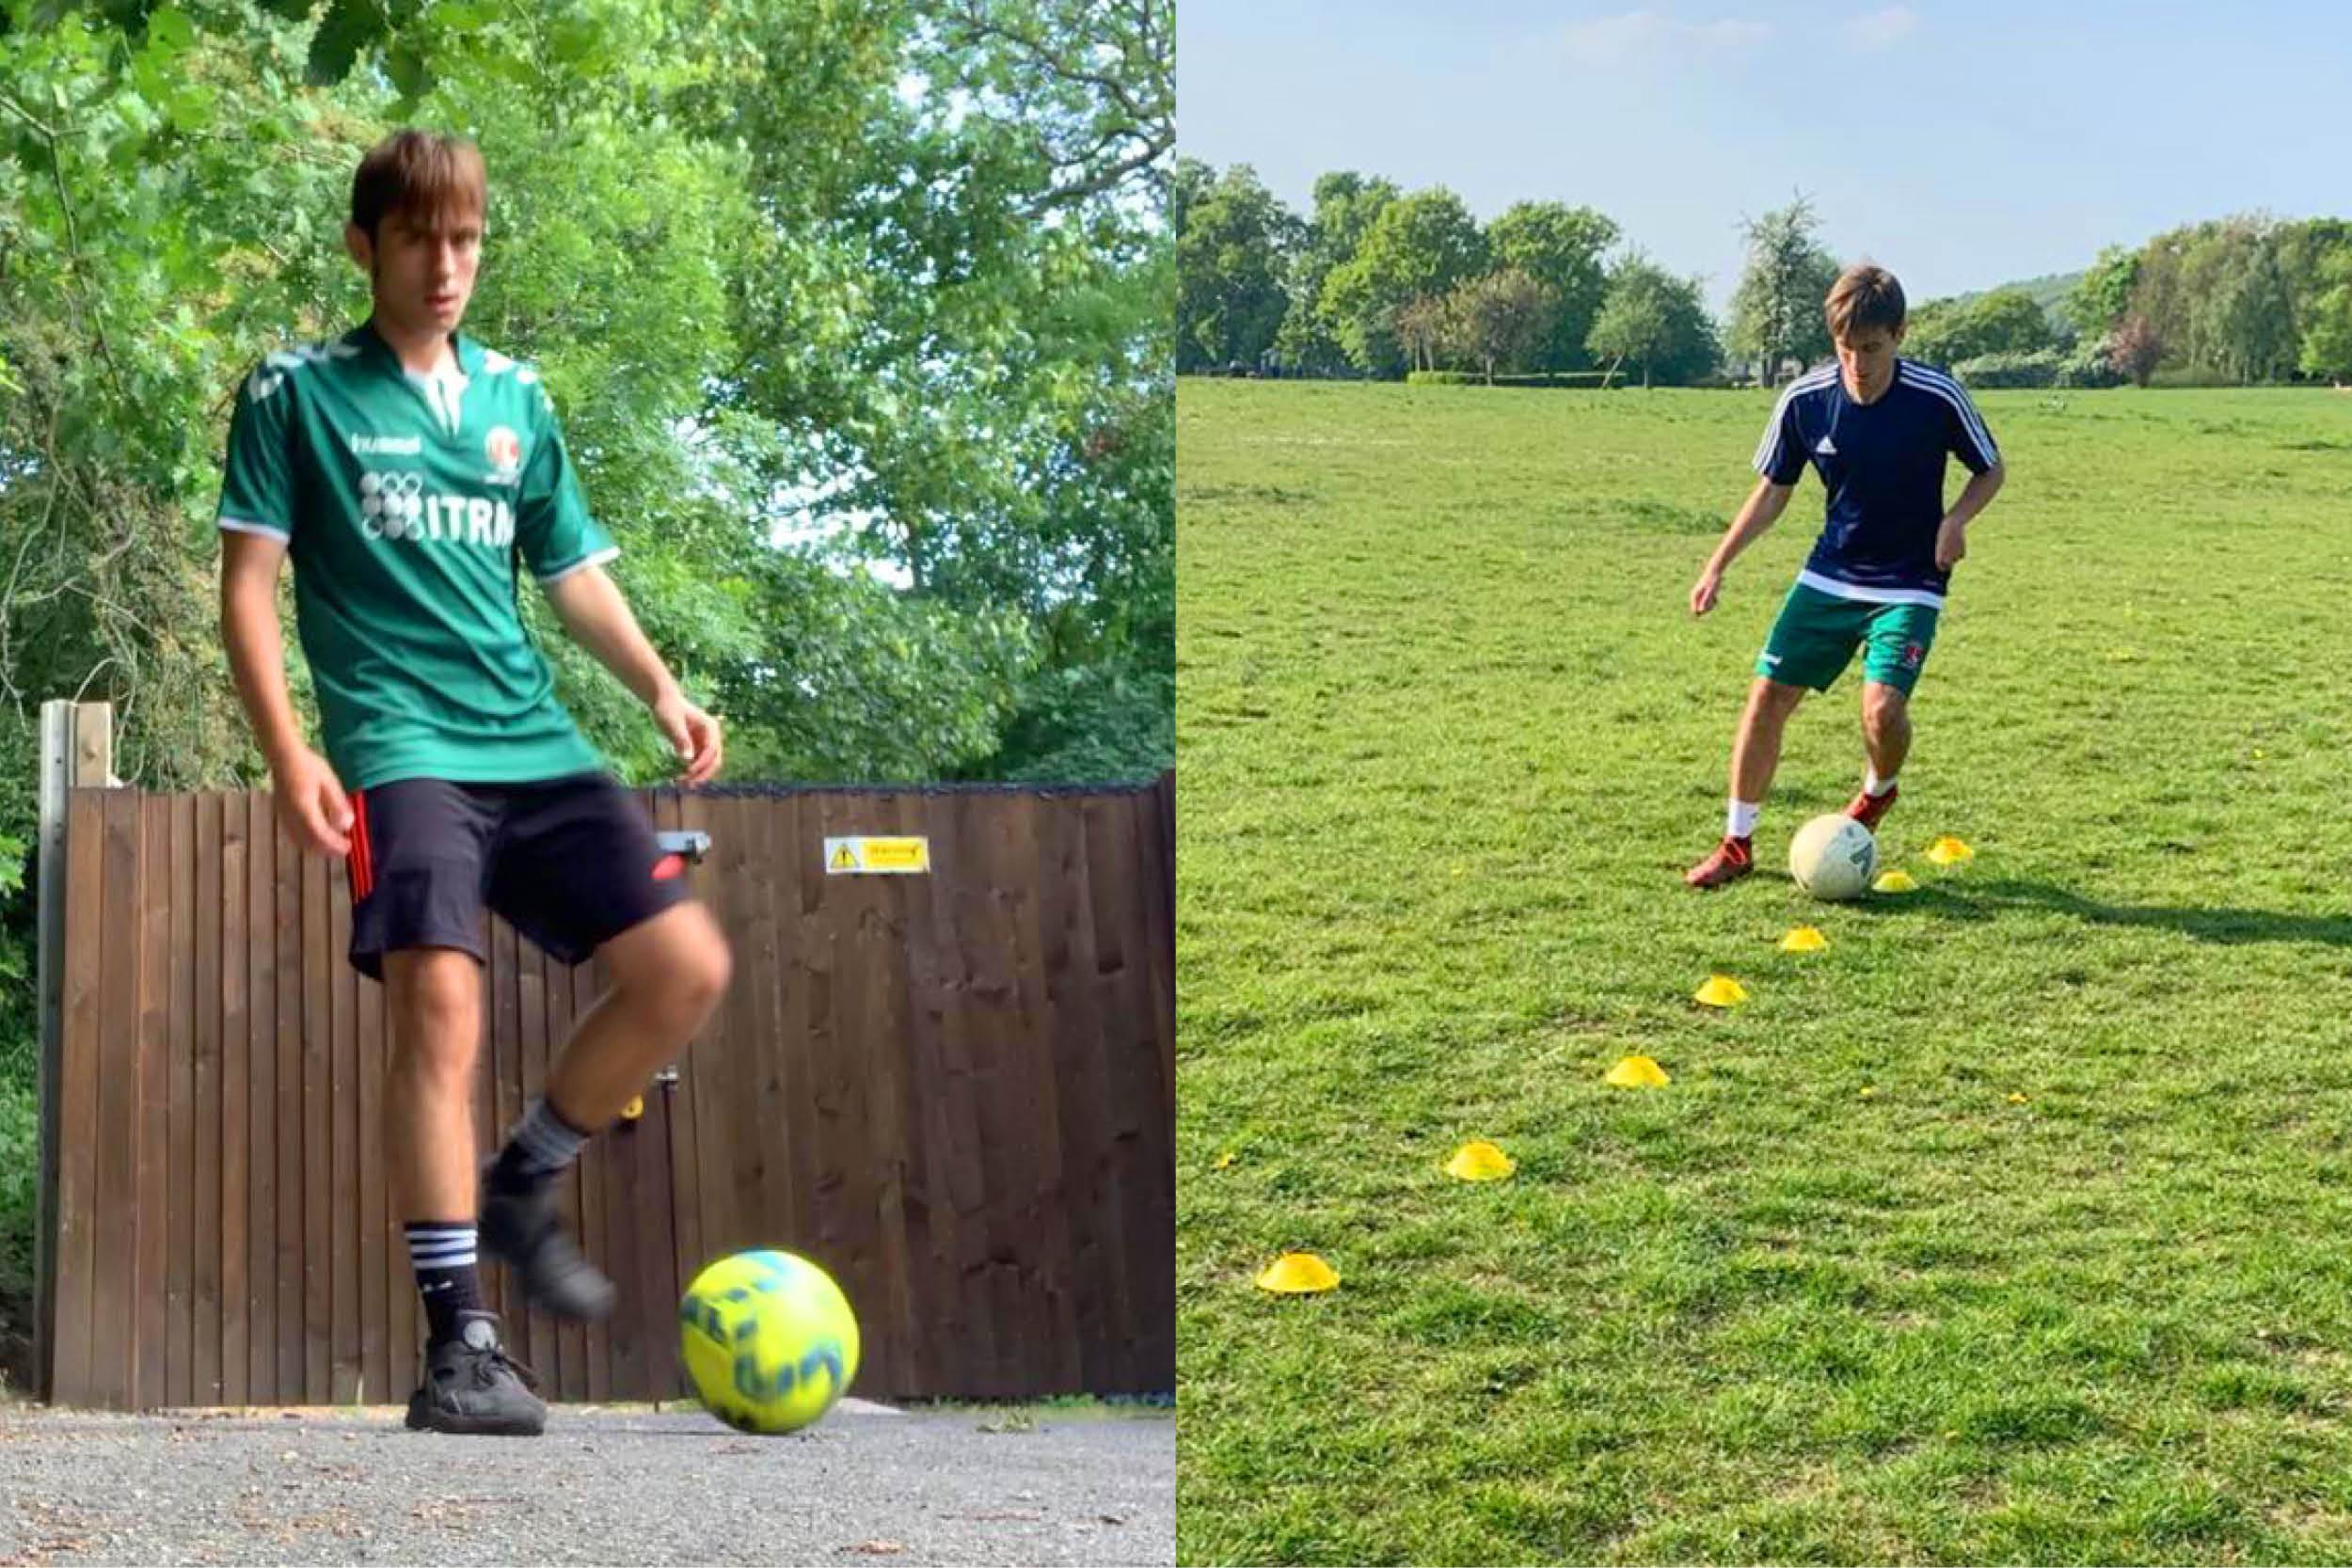 Two images of Jakey Palmer kicking a football and dribbling between cones